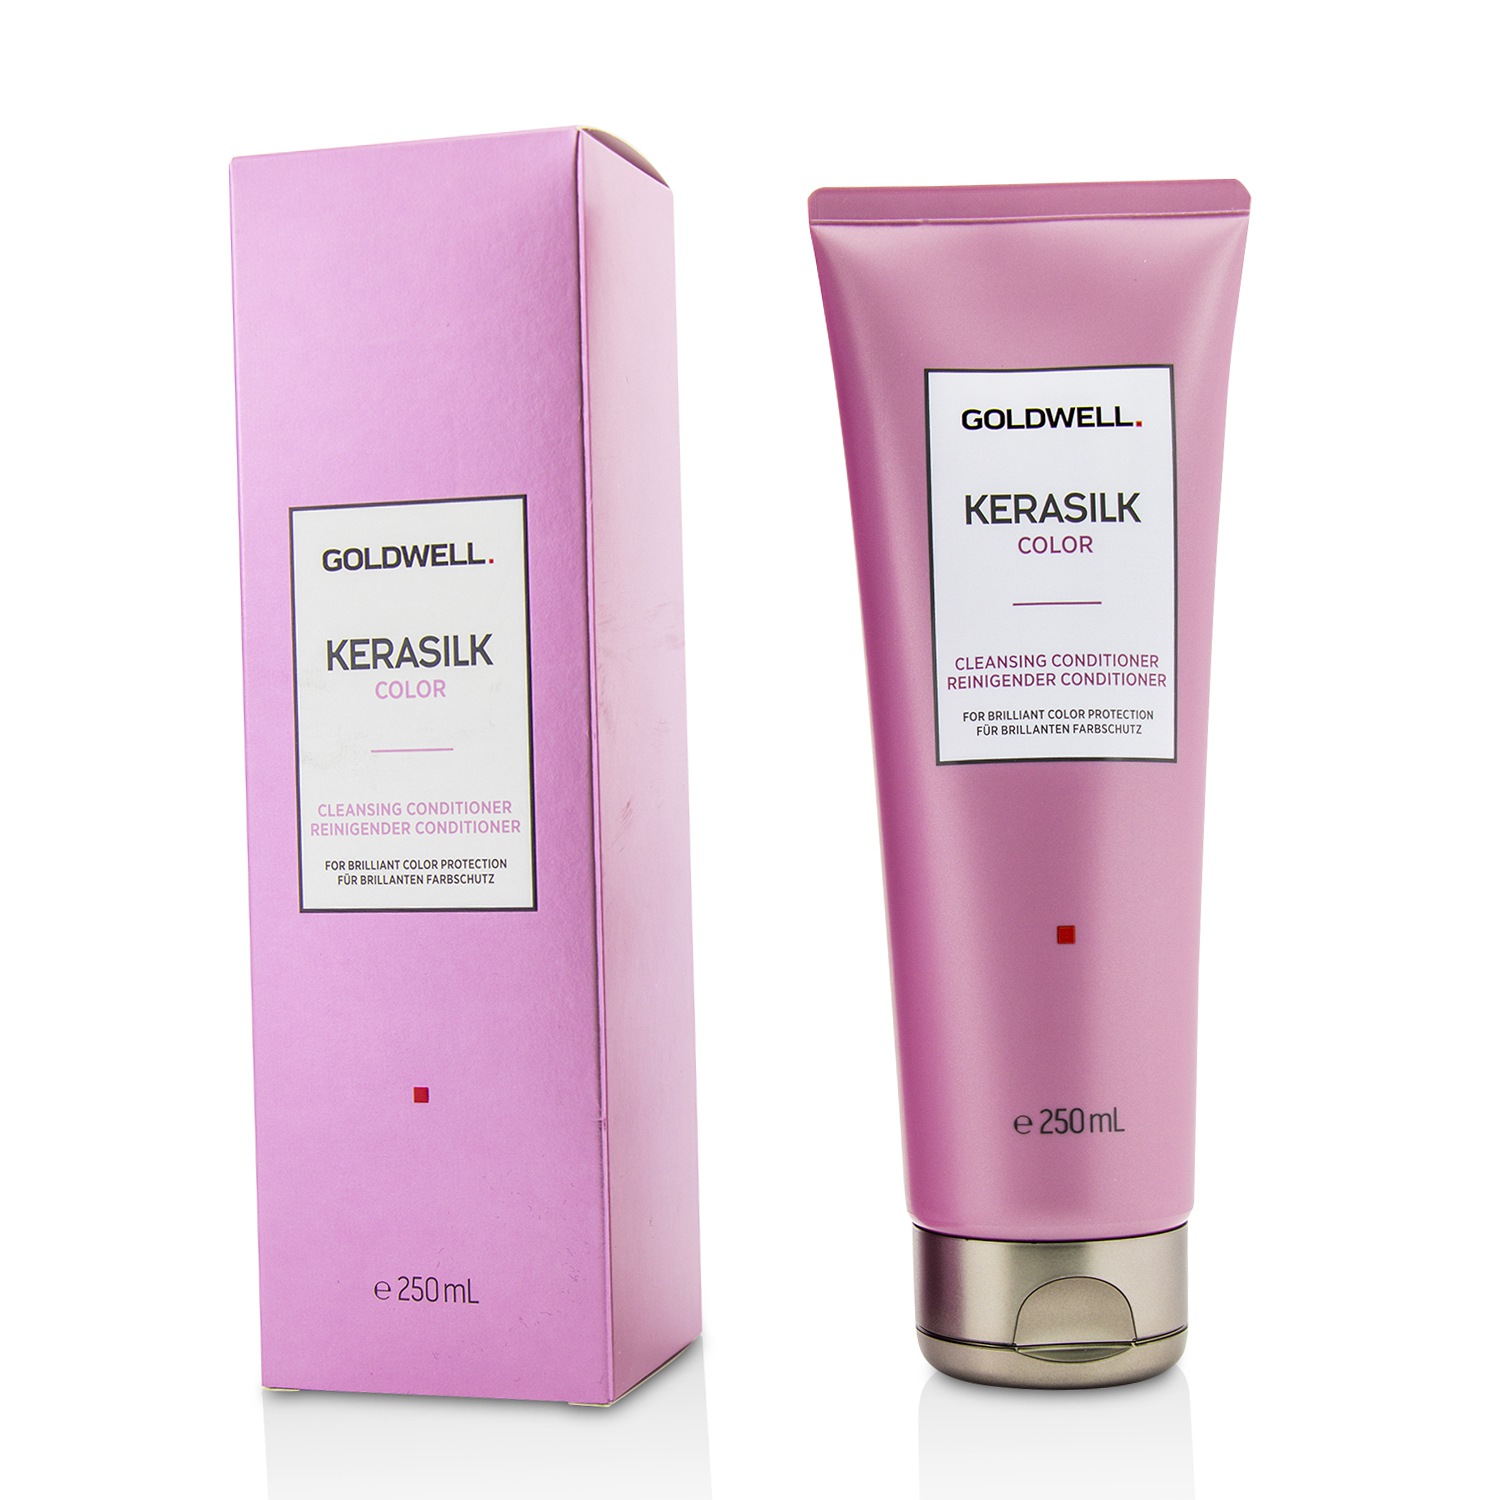 Kerasilk Color Cleansing Conditioner (For Brilliant Color Protection) Goldwell Image